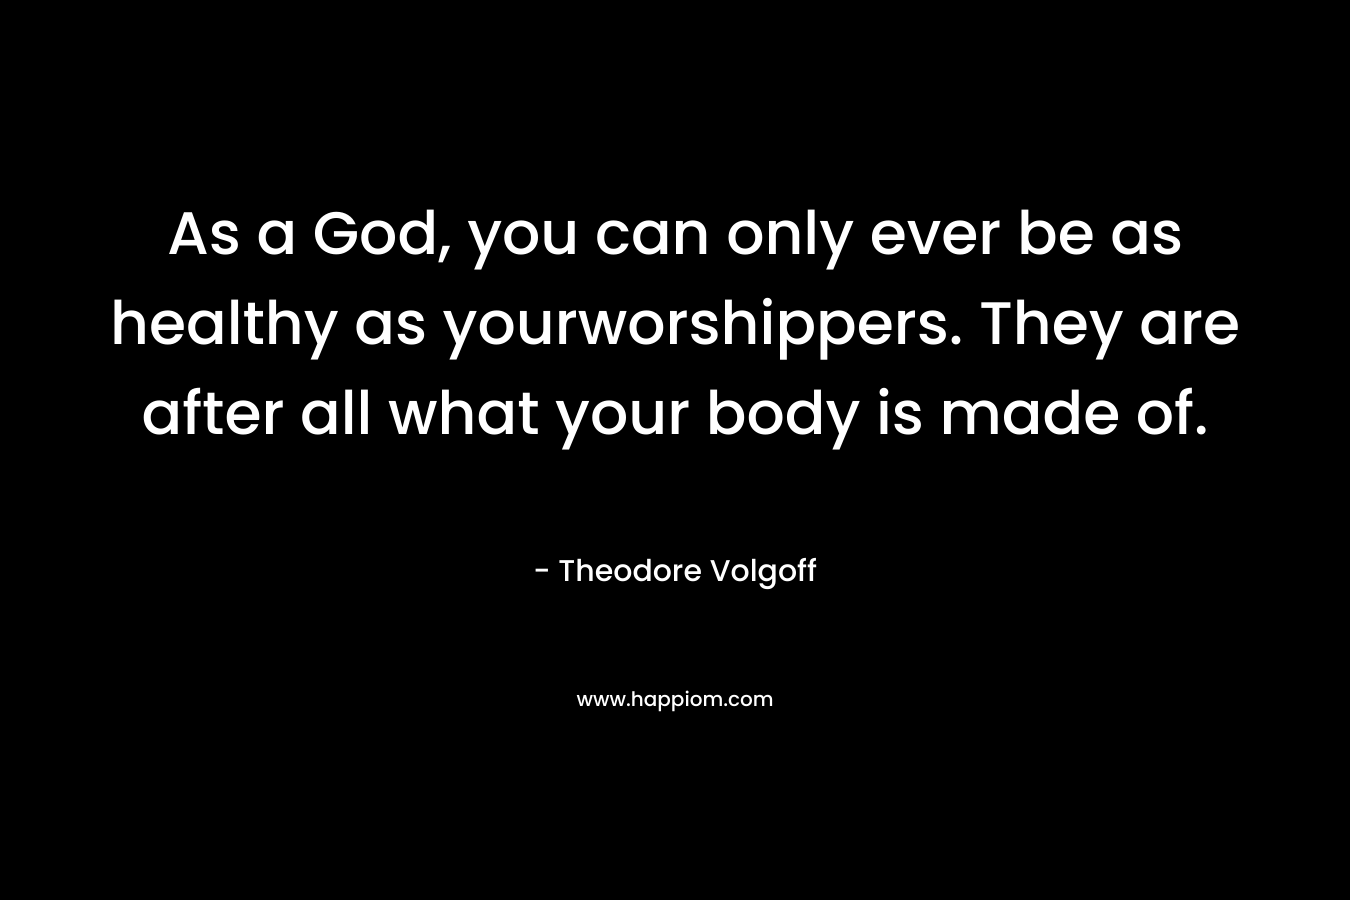 As a God, you can only ever be as healthy as yourworshippers. They are after all what your body is made of.